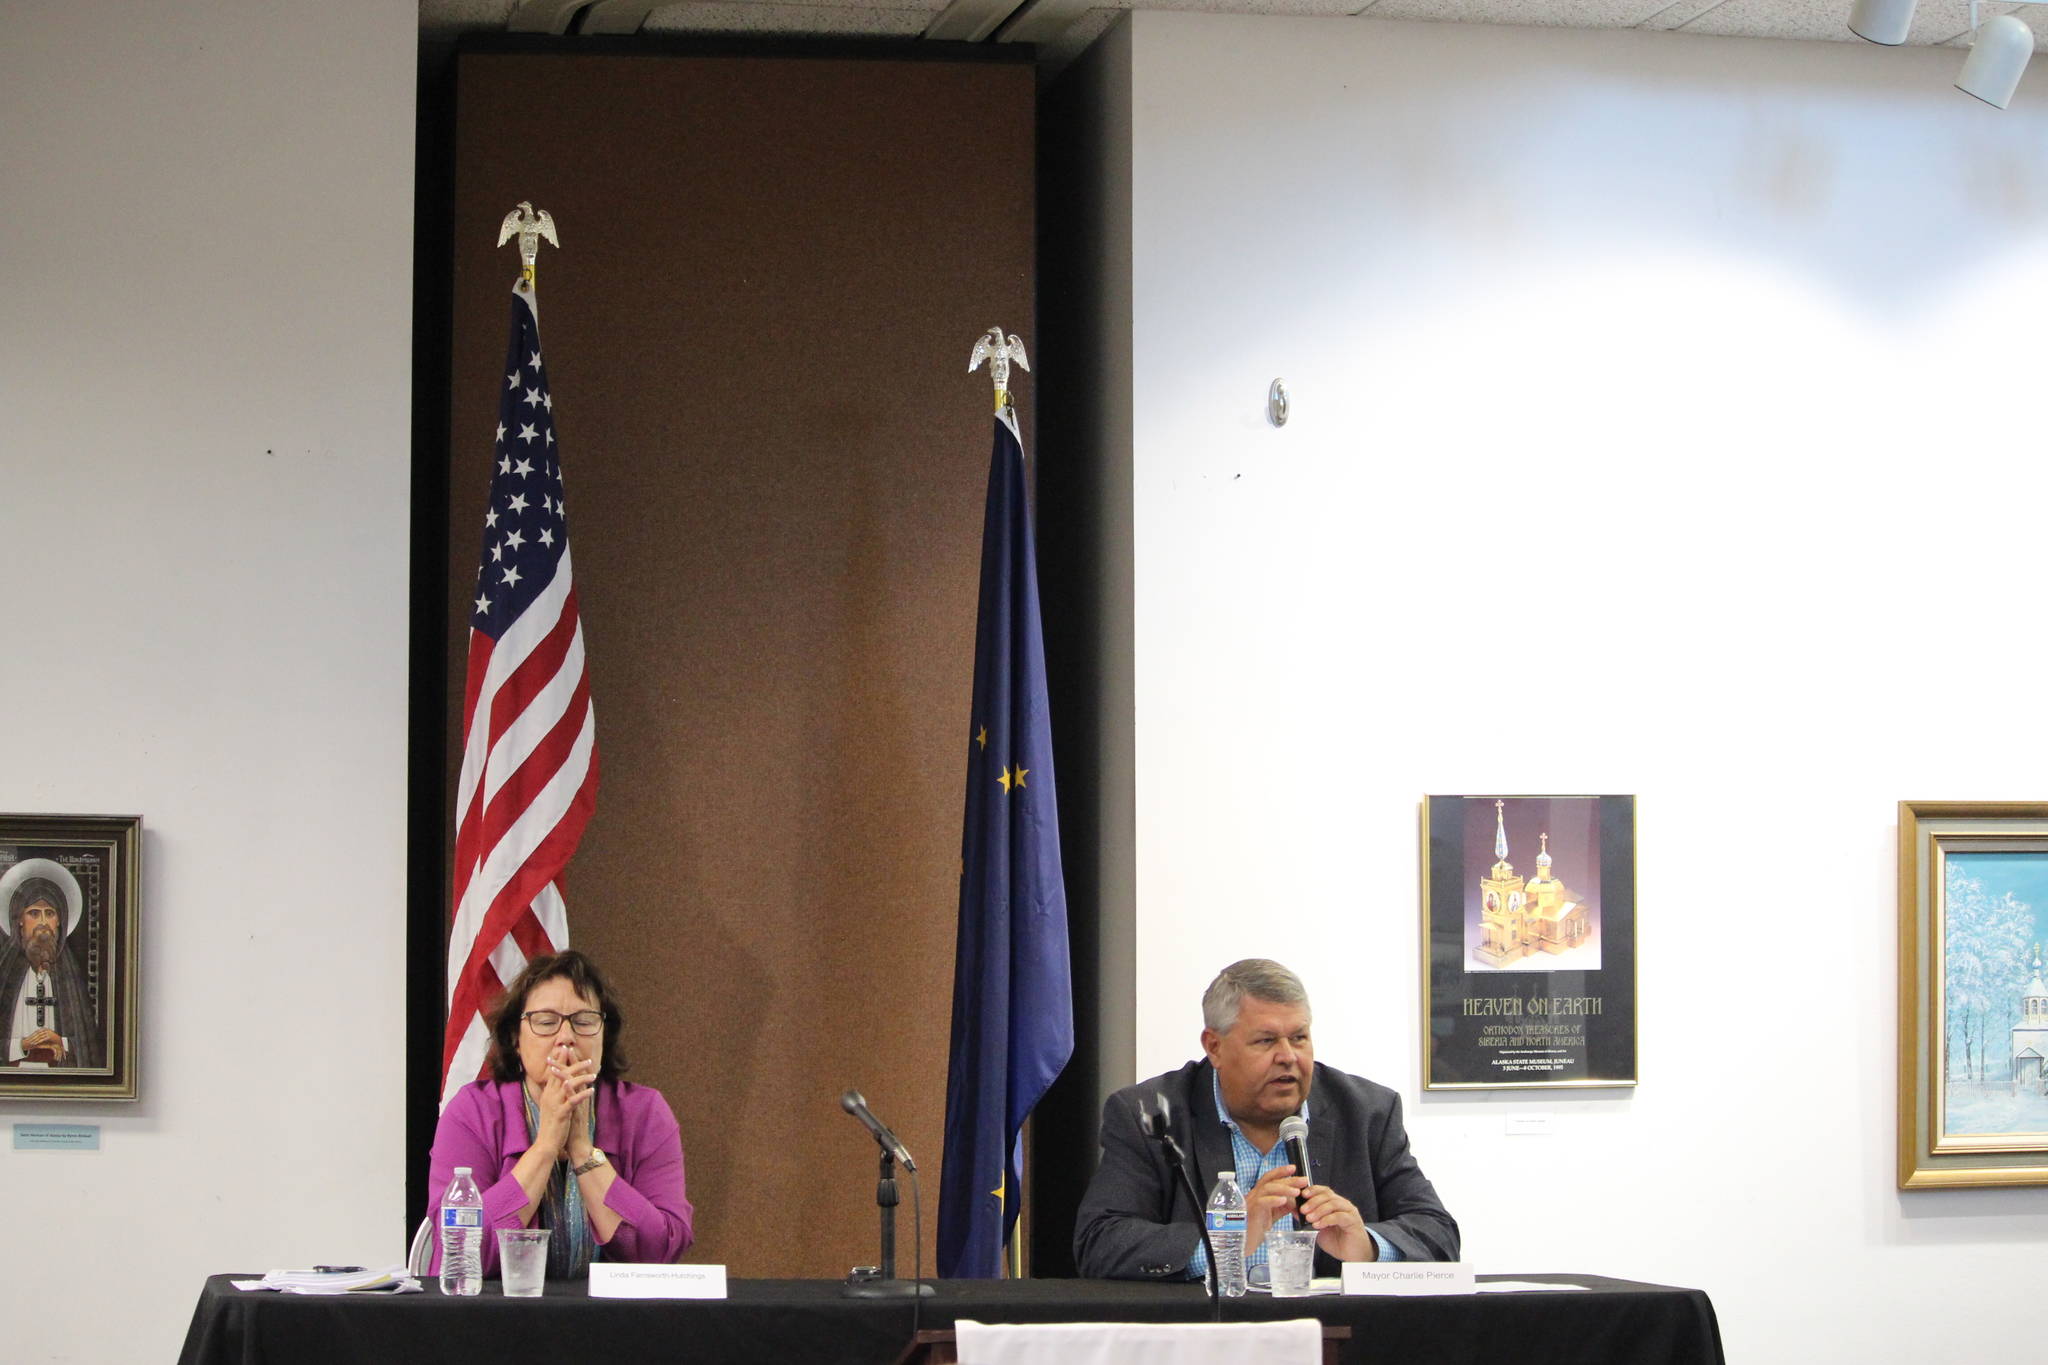 Linda Farnsworth Hutchings, left, and Kenai Peninsula Borough Mayor Charlie Pierce, right, participate in a mayoral candidate forum hosted by the Kenai Chamber of Commerce at the Kenai Visitor and Cultural Center on Wednesday, Sept. 9, 2020. (Photo by Brian Mazurek/Peninsula Clarion)